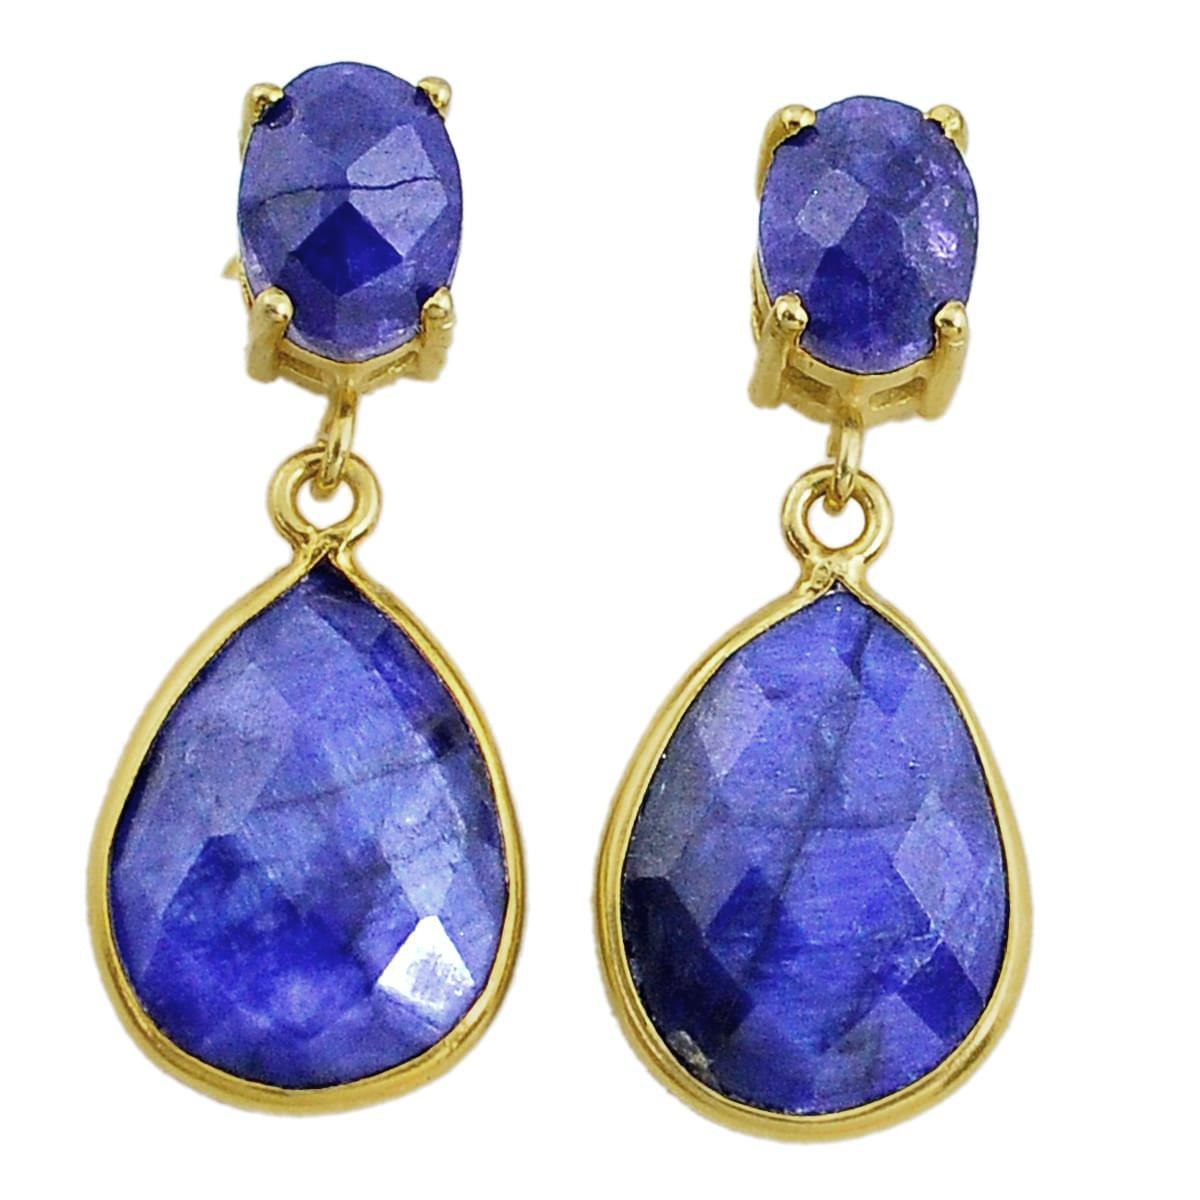 A pair of 925 silver gilt drop earrings set with faceted cut sapphires, L. 3cm.